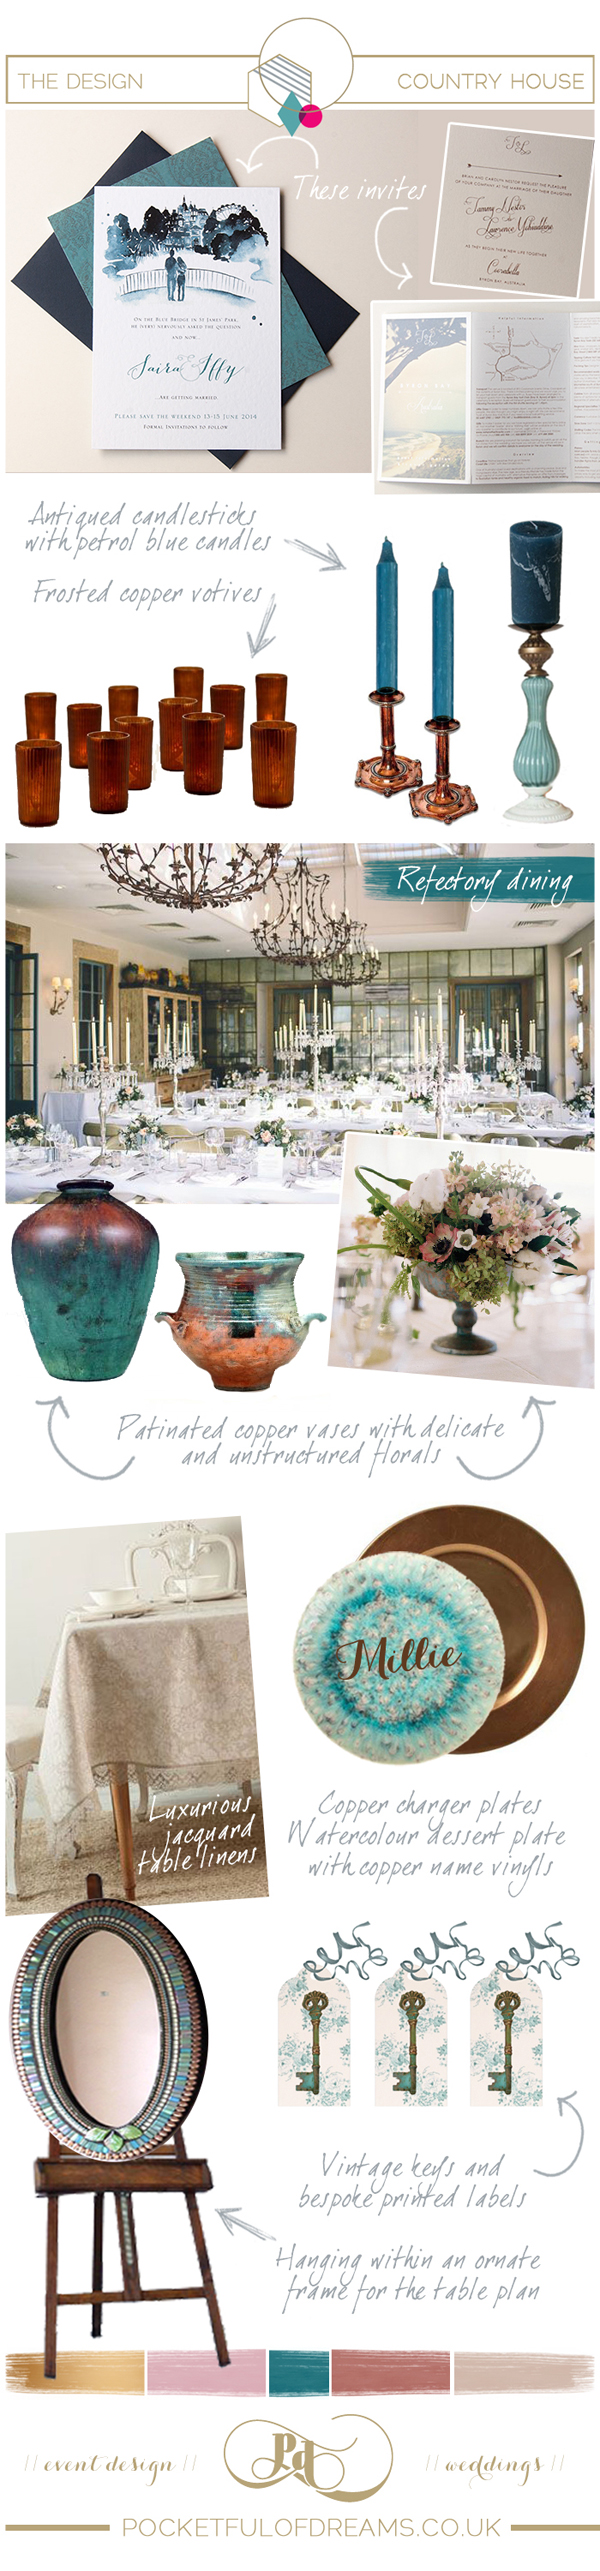 4-country-house-wedding-inspiration-pocketful-of-dreams-for-love-my-dress - the design